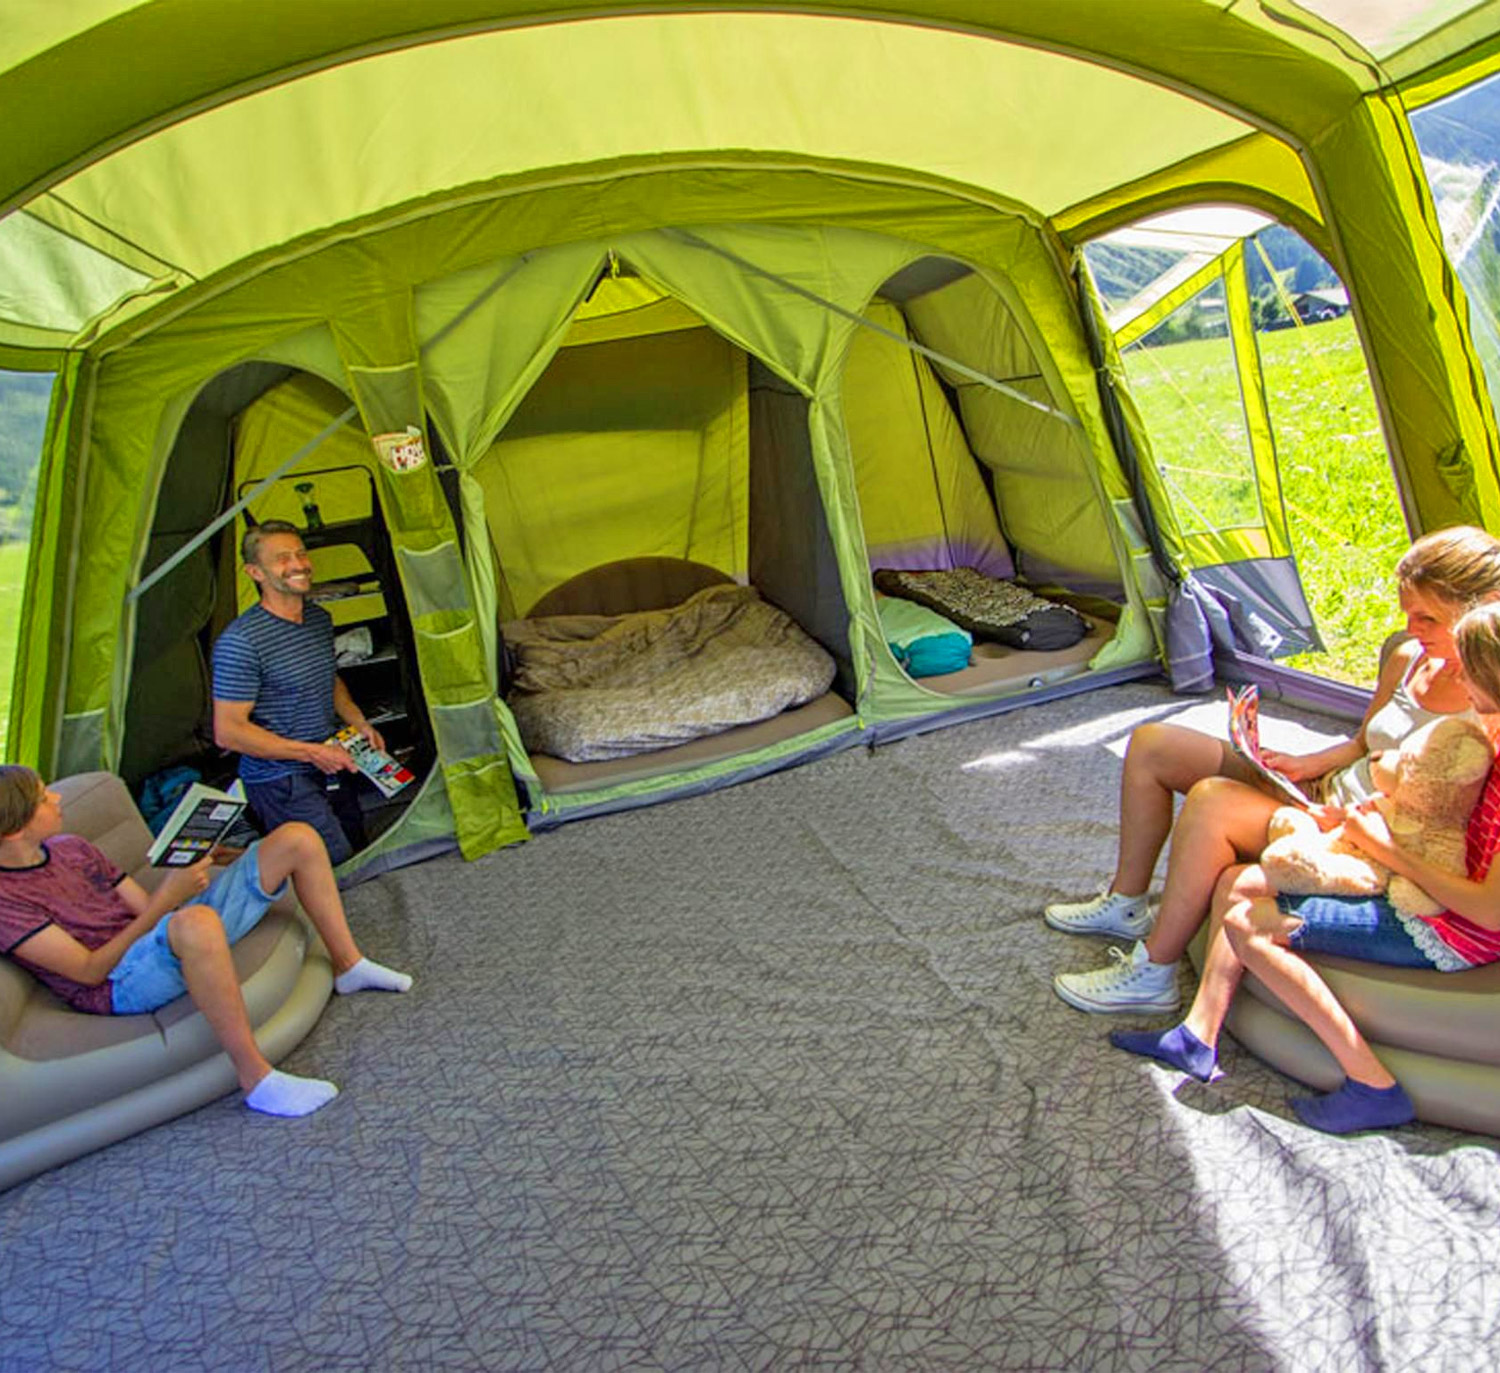 giant family tent that has private bedroom compartments and a full living area